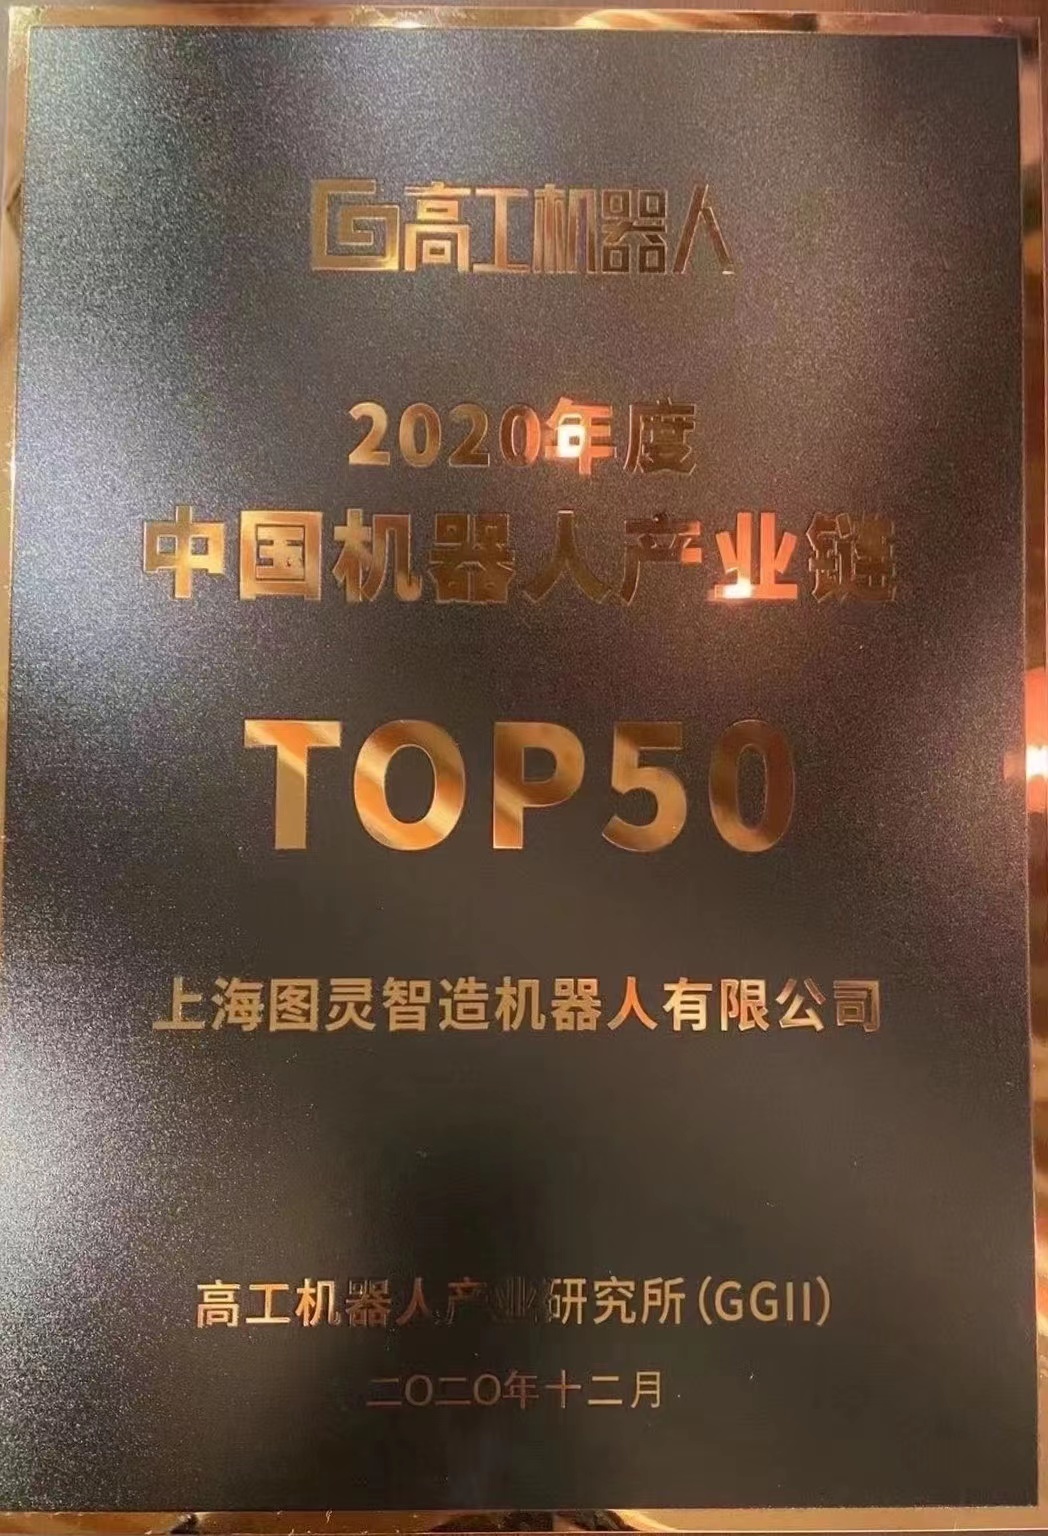 China Robot Industry Chain TOP50 in 2020